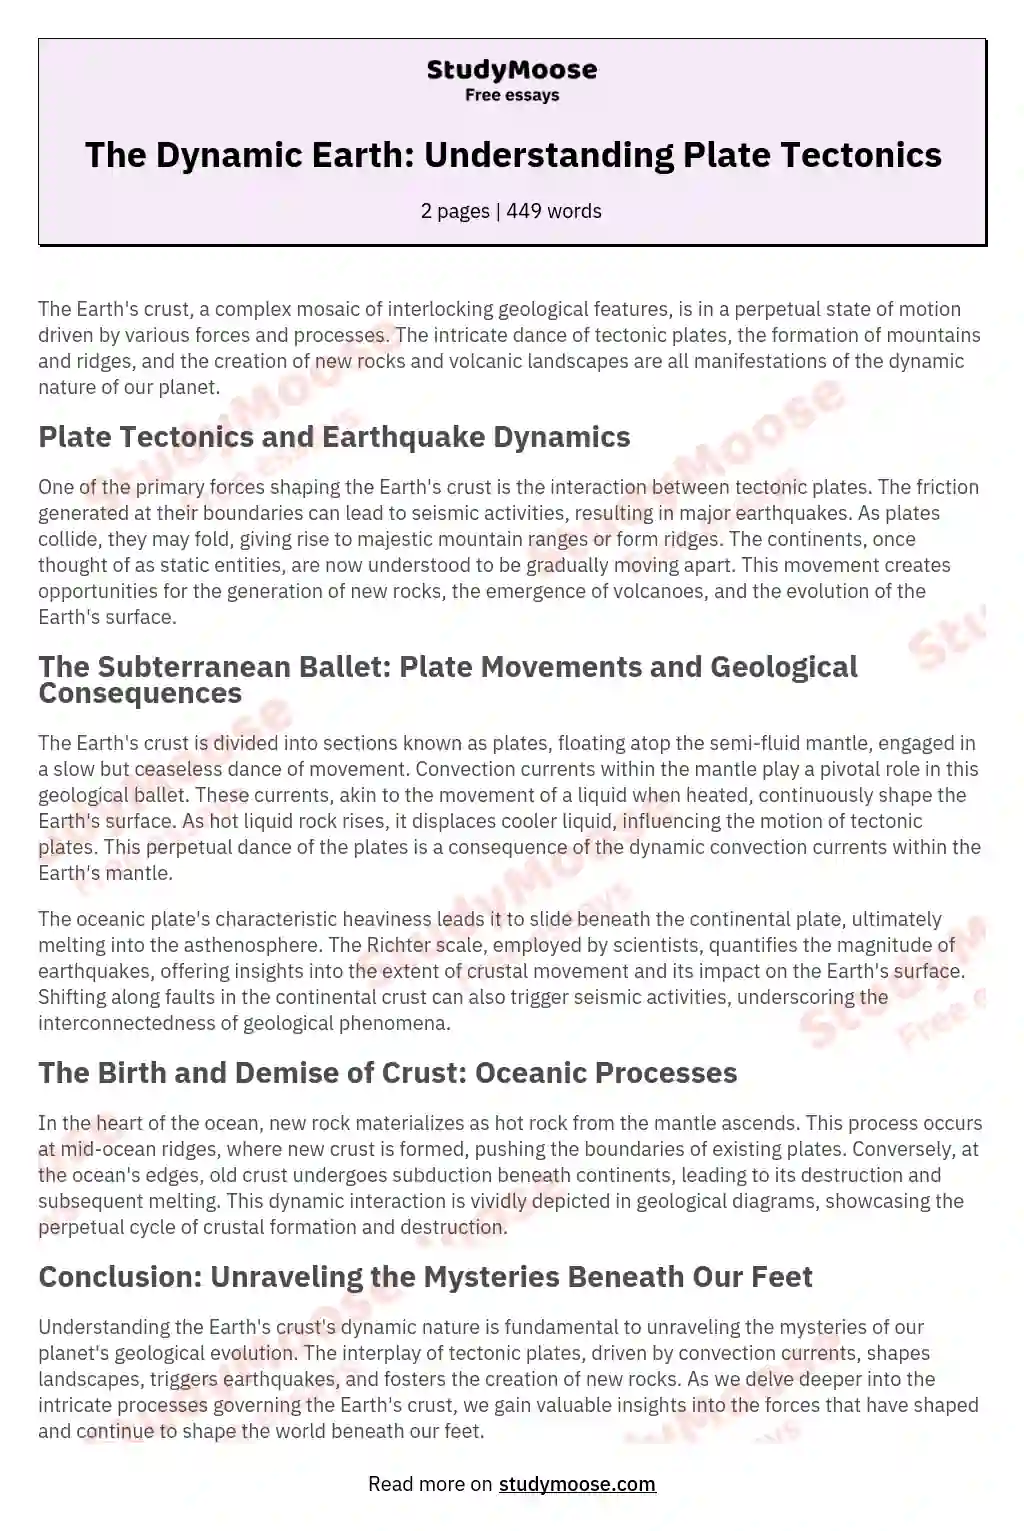 The Dynamic Earth: Understanding Plate Tectonics essay